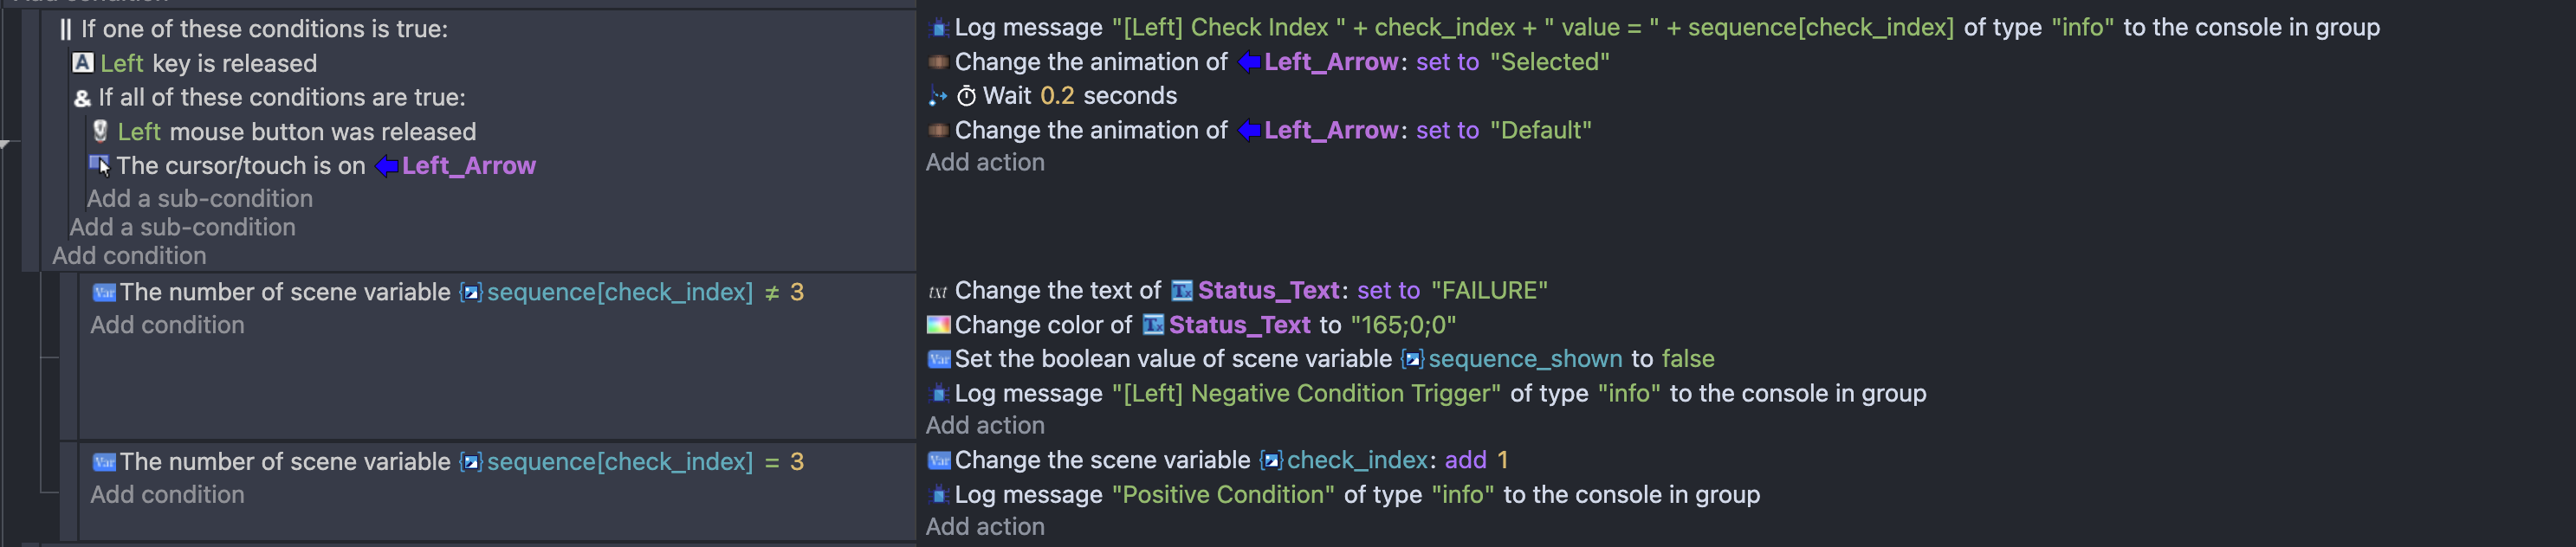 Screenshot of the Nested Conditionals